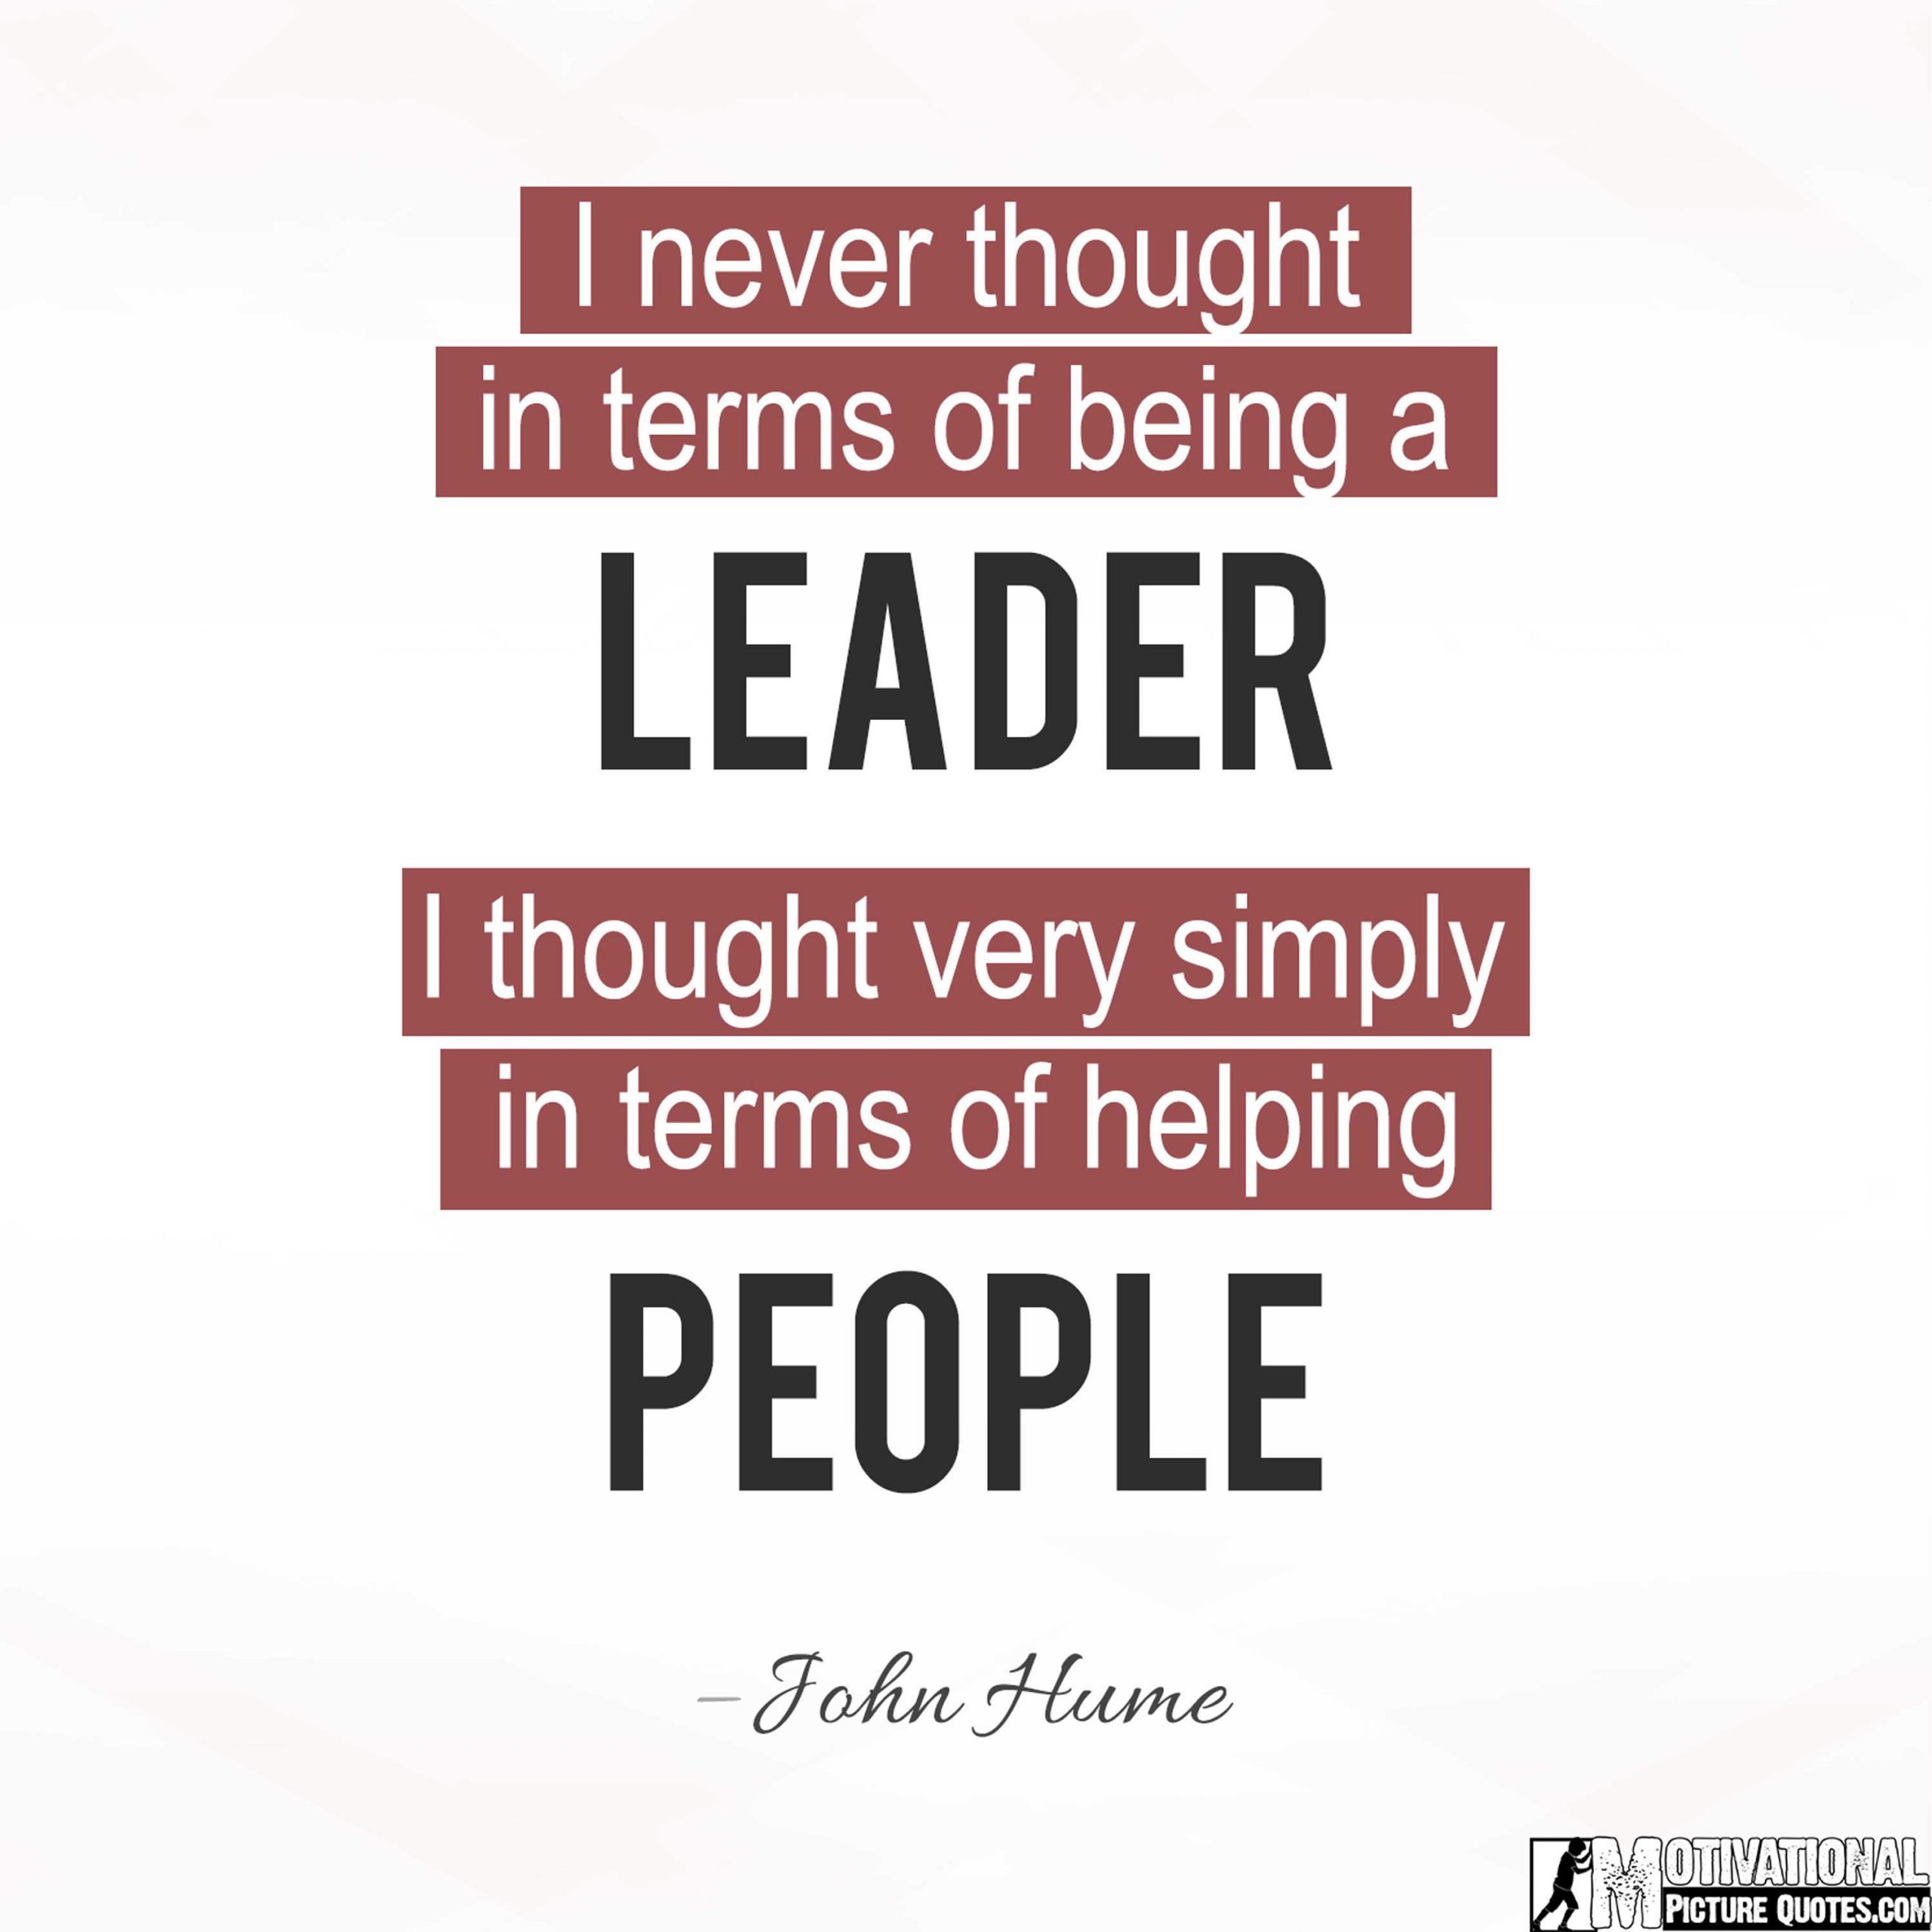 Leadership Quotes For Students
 20 Leadership Quotes for Kids Students and Teachers